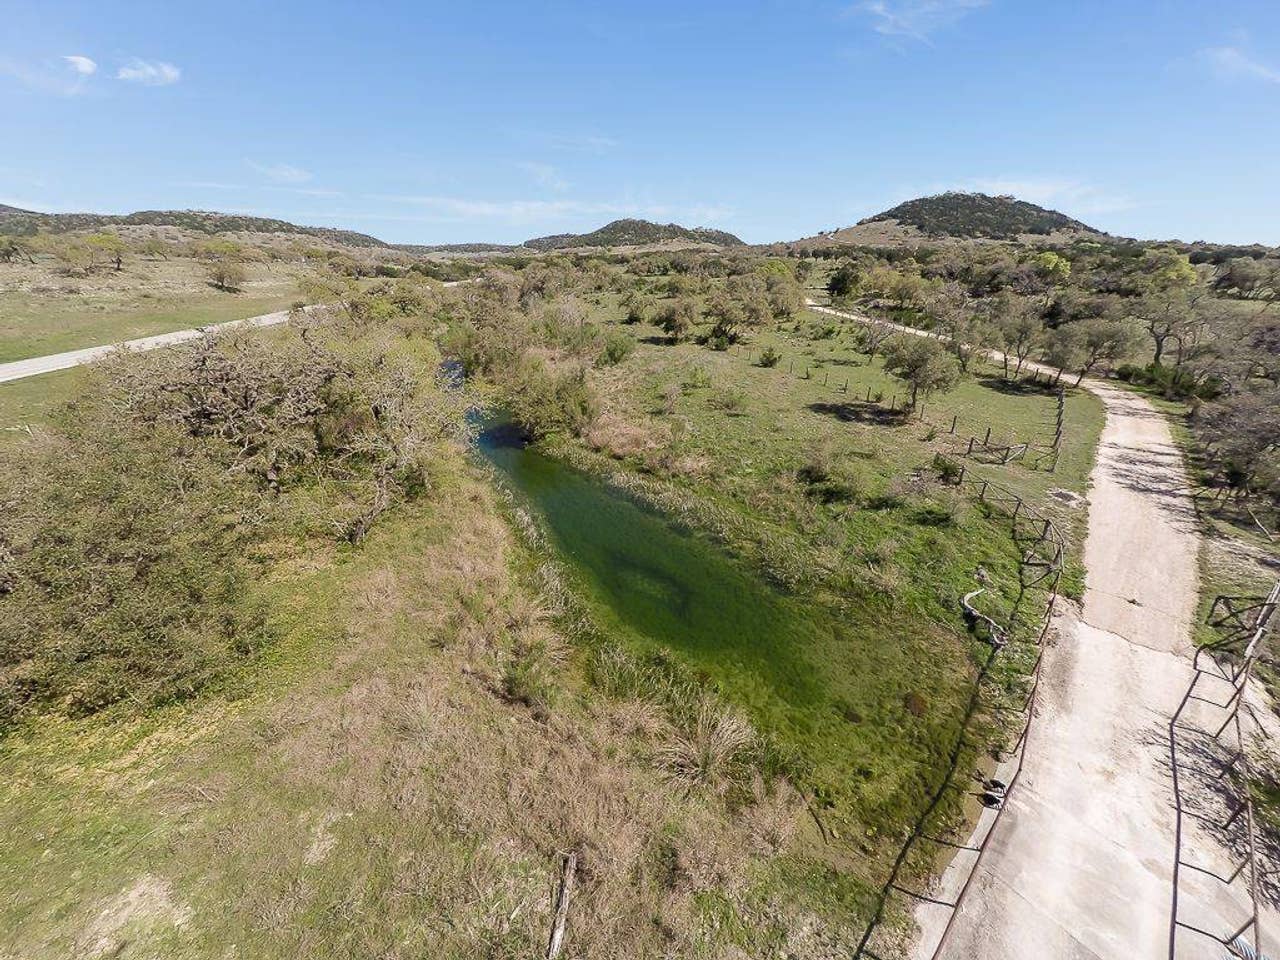                                                 Don't forget your camera! You'll have a 360-degree view of the surrounding Hill Country.